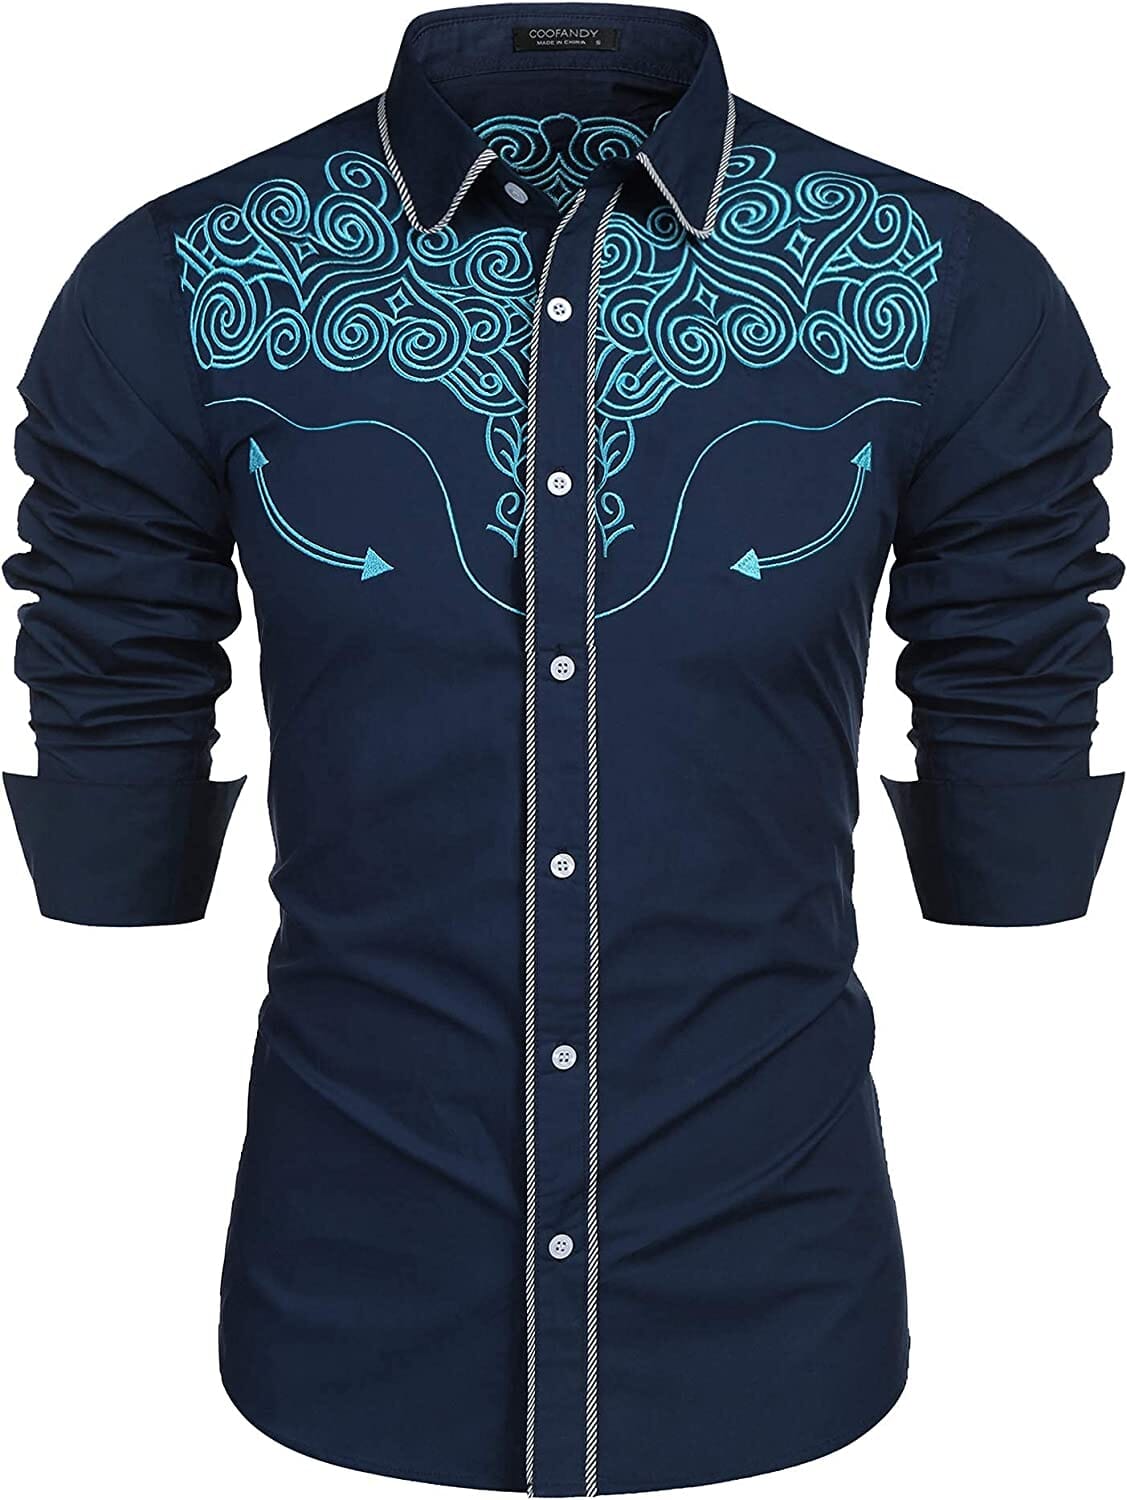 Embroidered Cowboy Button Down Shirt (US Only) Shirts COOFANDY Store Classic Blue M 